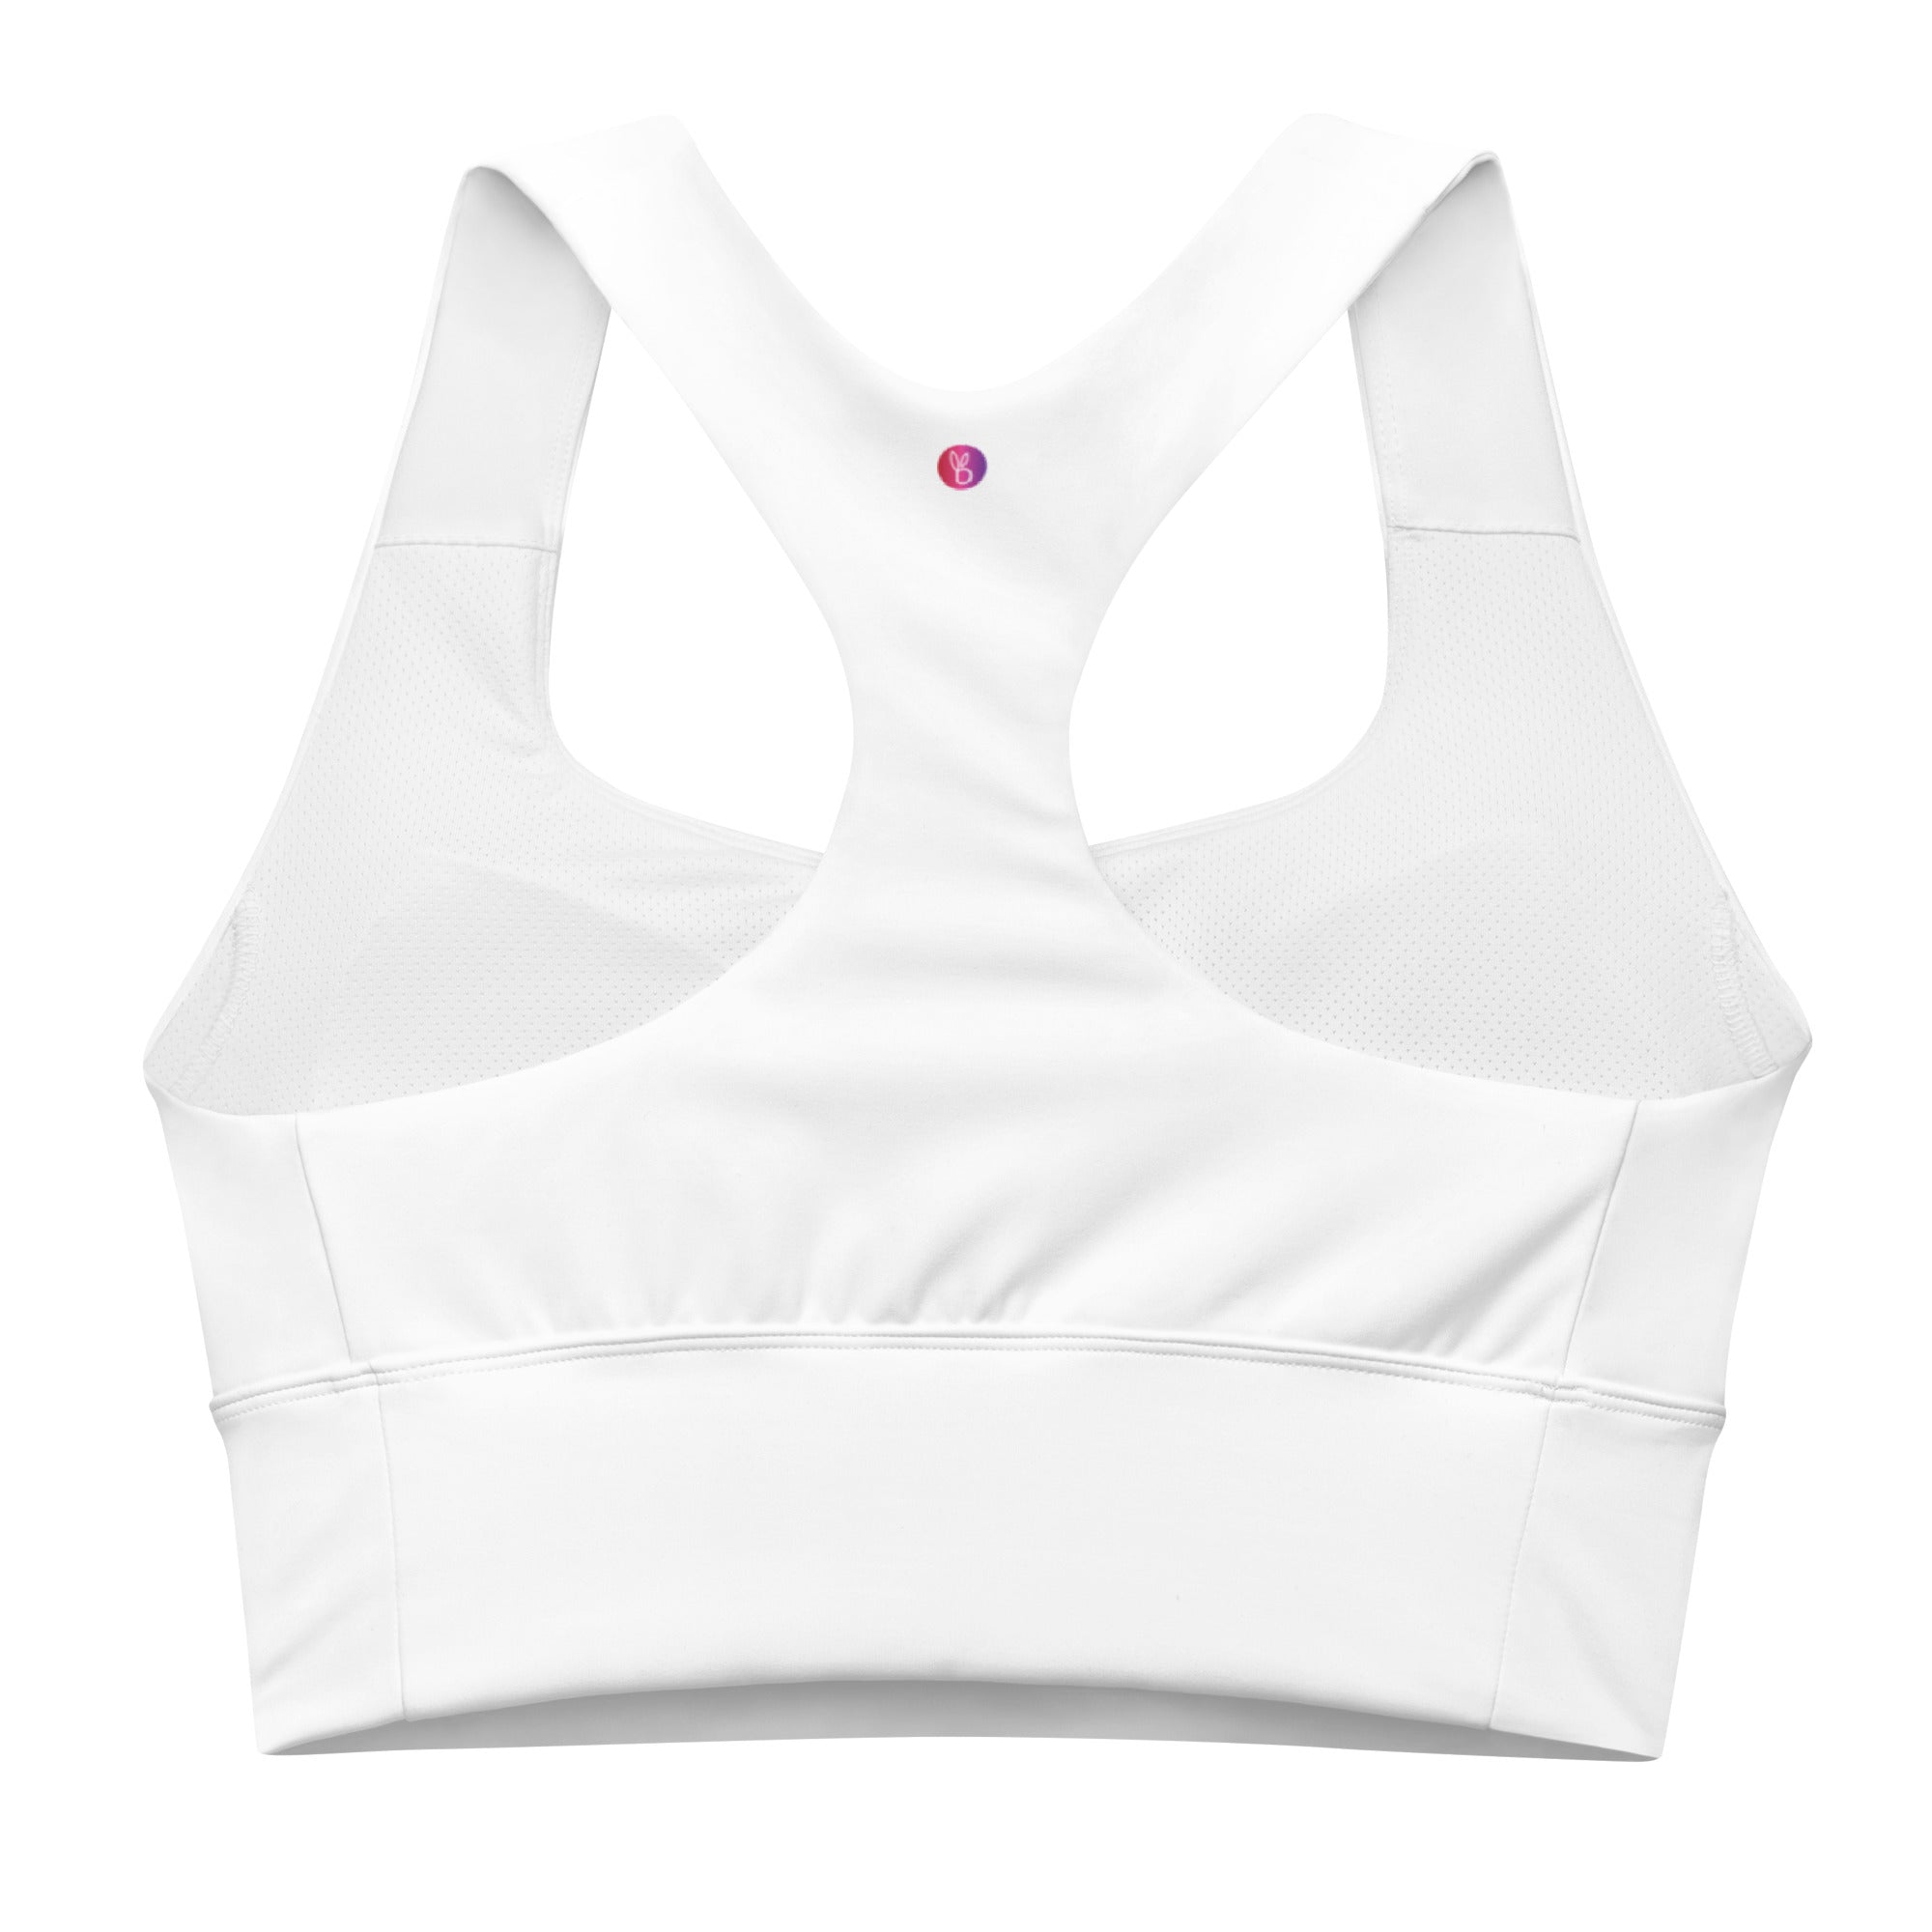 Penkiiy Sports Bras for Women Women's Ruched Sports Bras Padded Workout  Tops Medium Support Crop Tops White Bras 